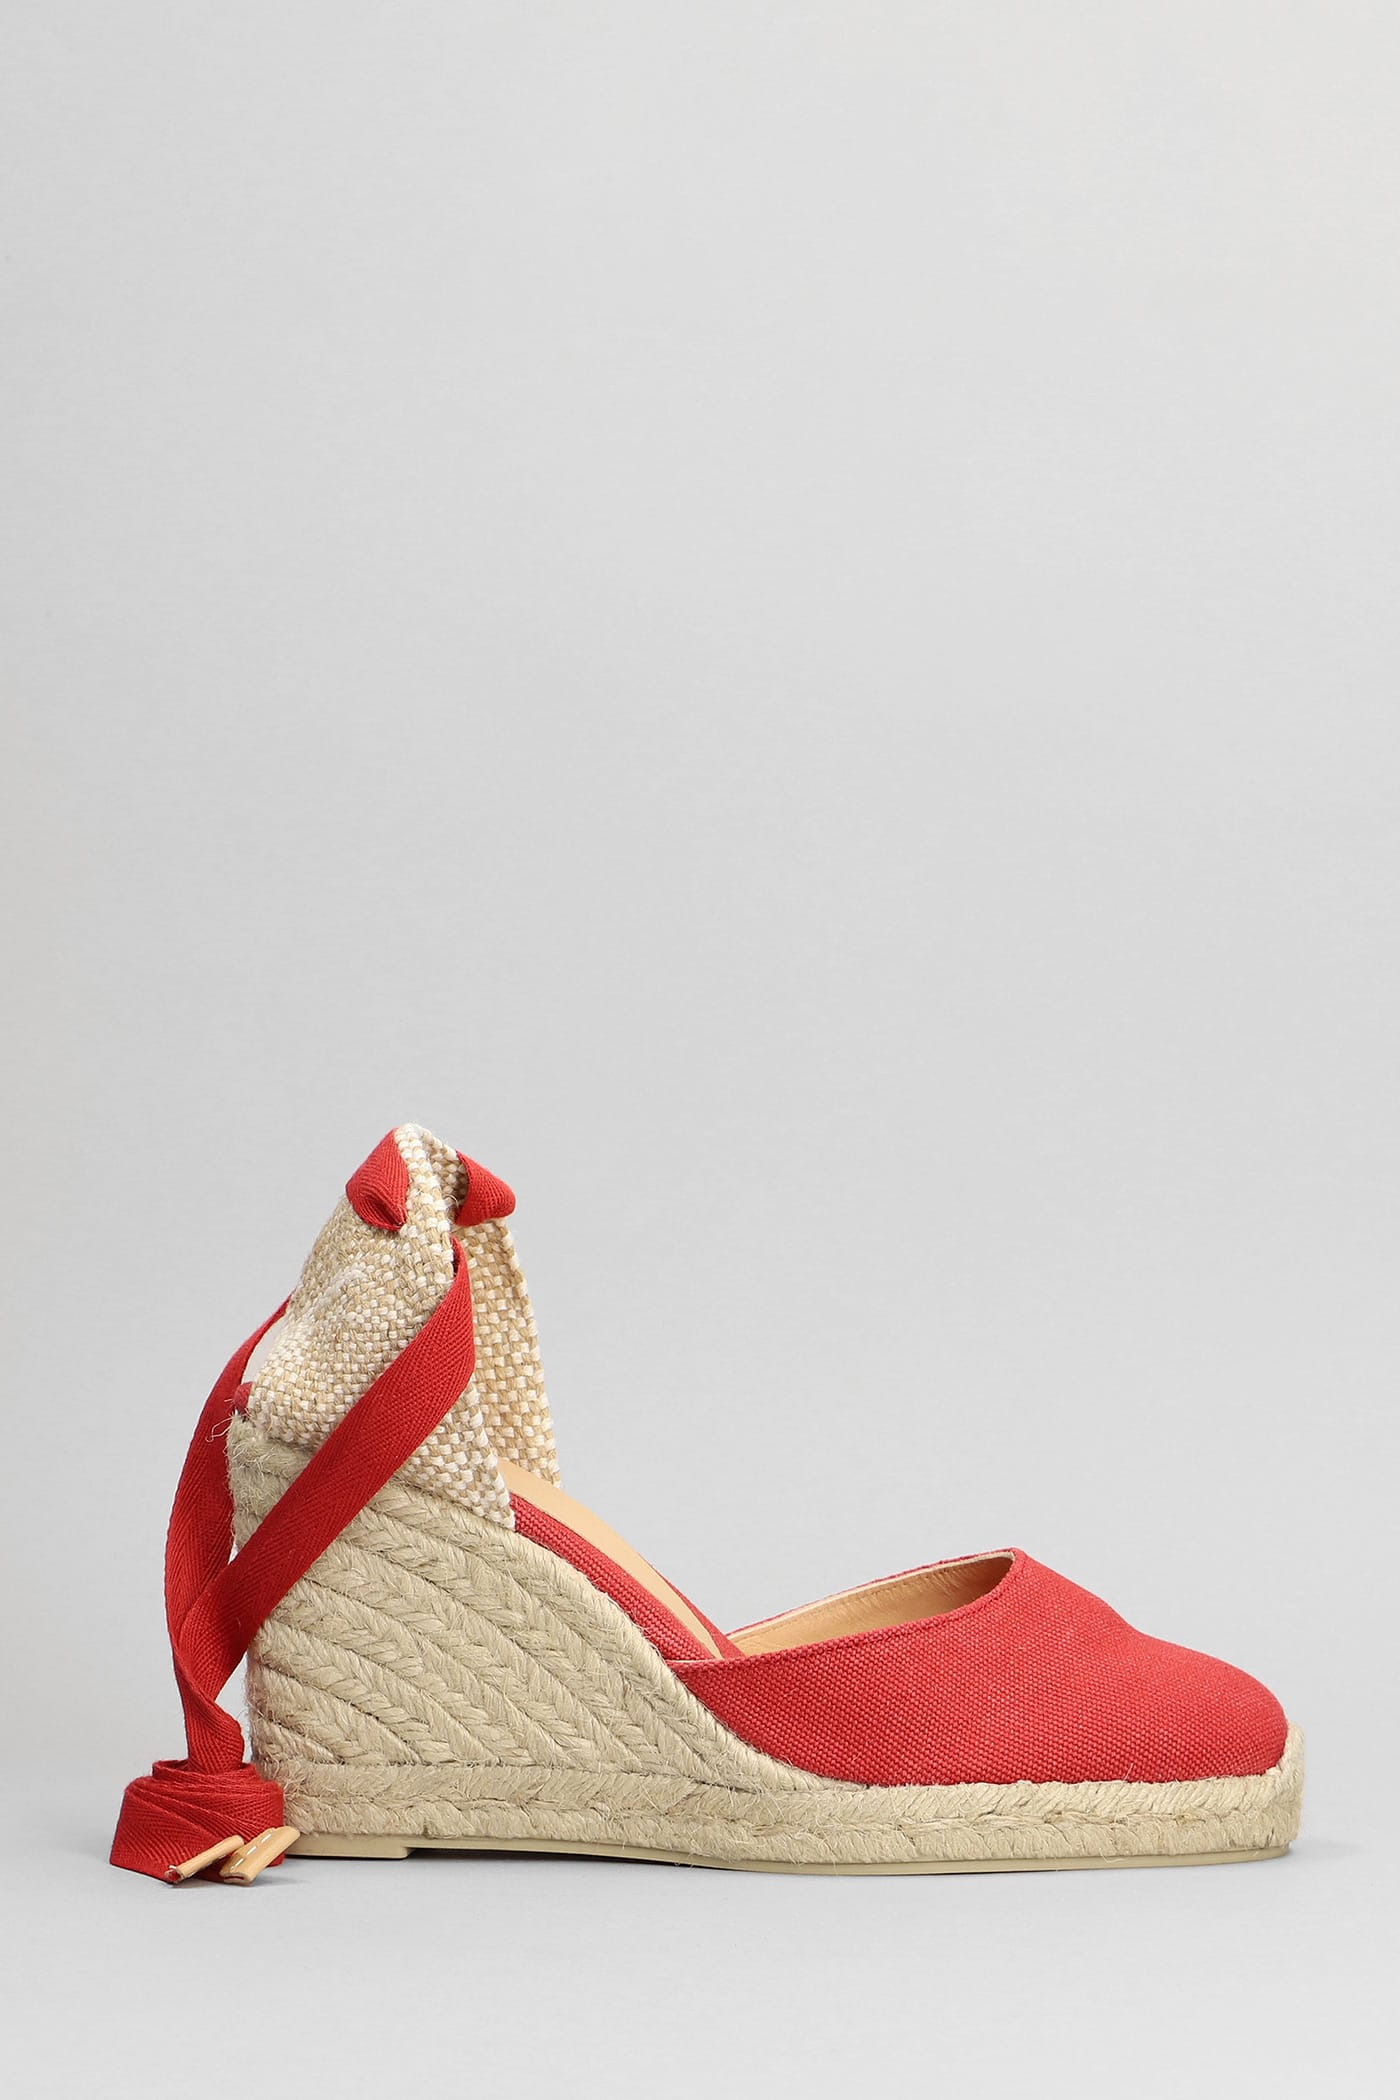 Castañer Carina-8-002 Wedges In Red Canvas